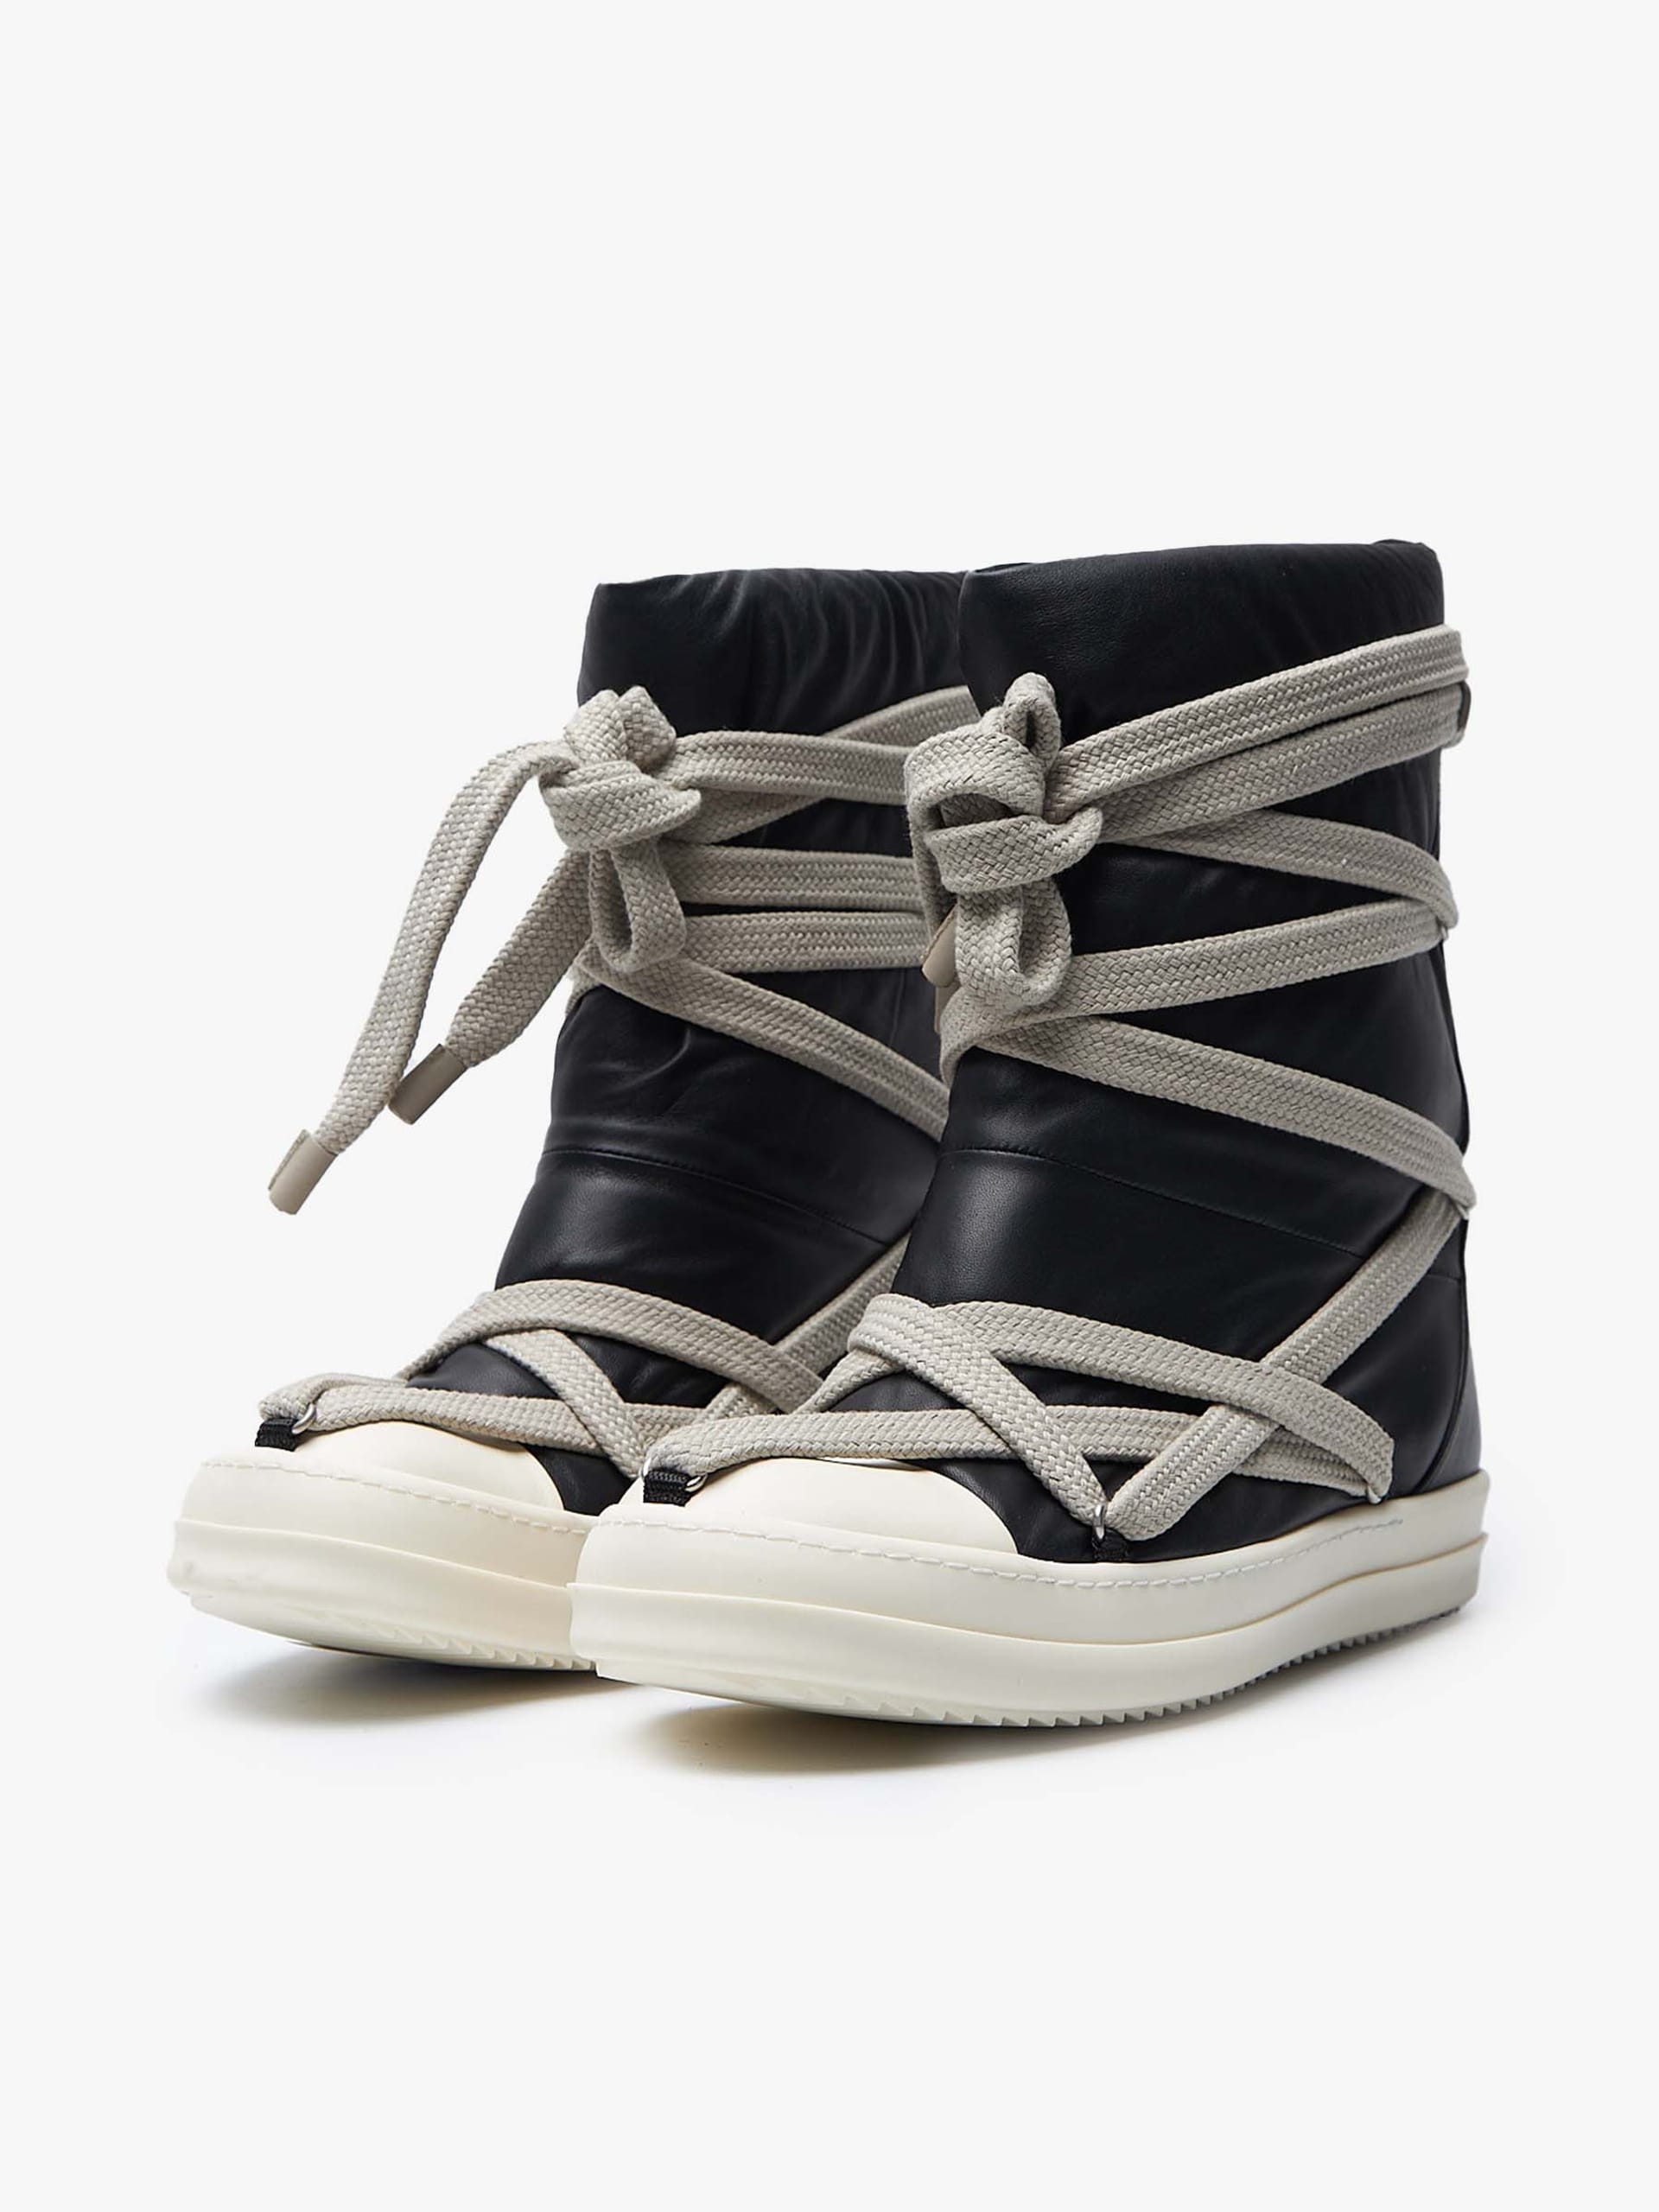 Rick Owens Black and Milk Jumbo Puffer Megalace Boots